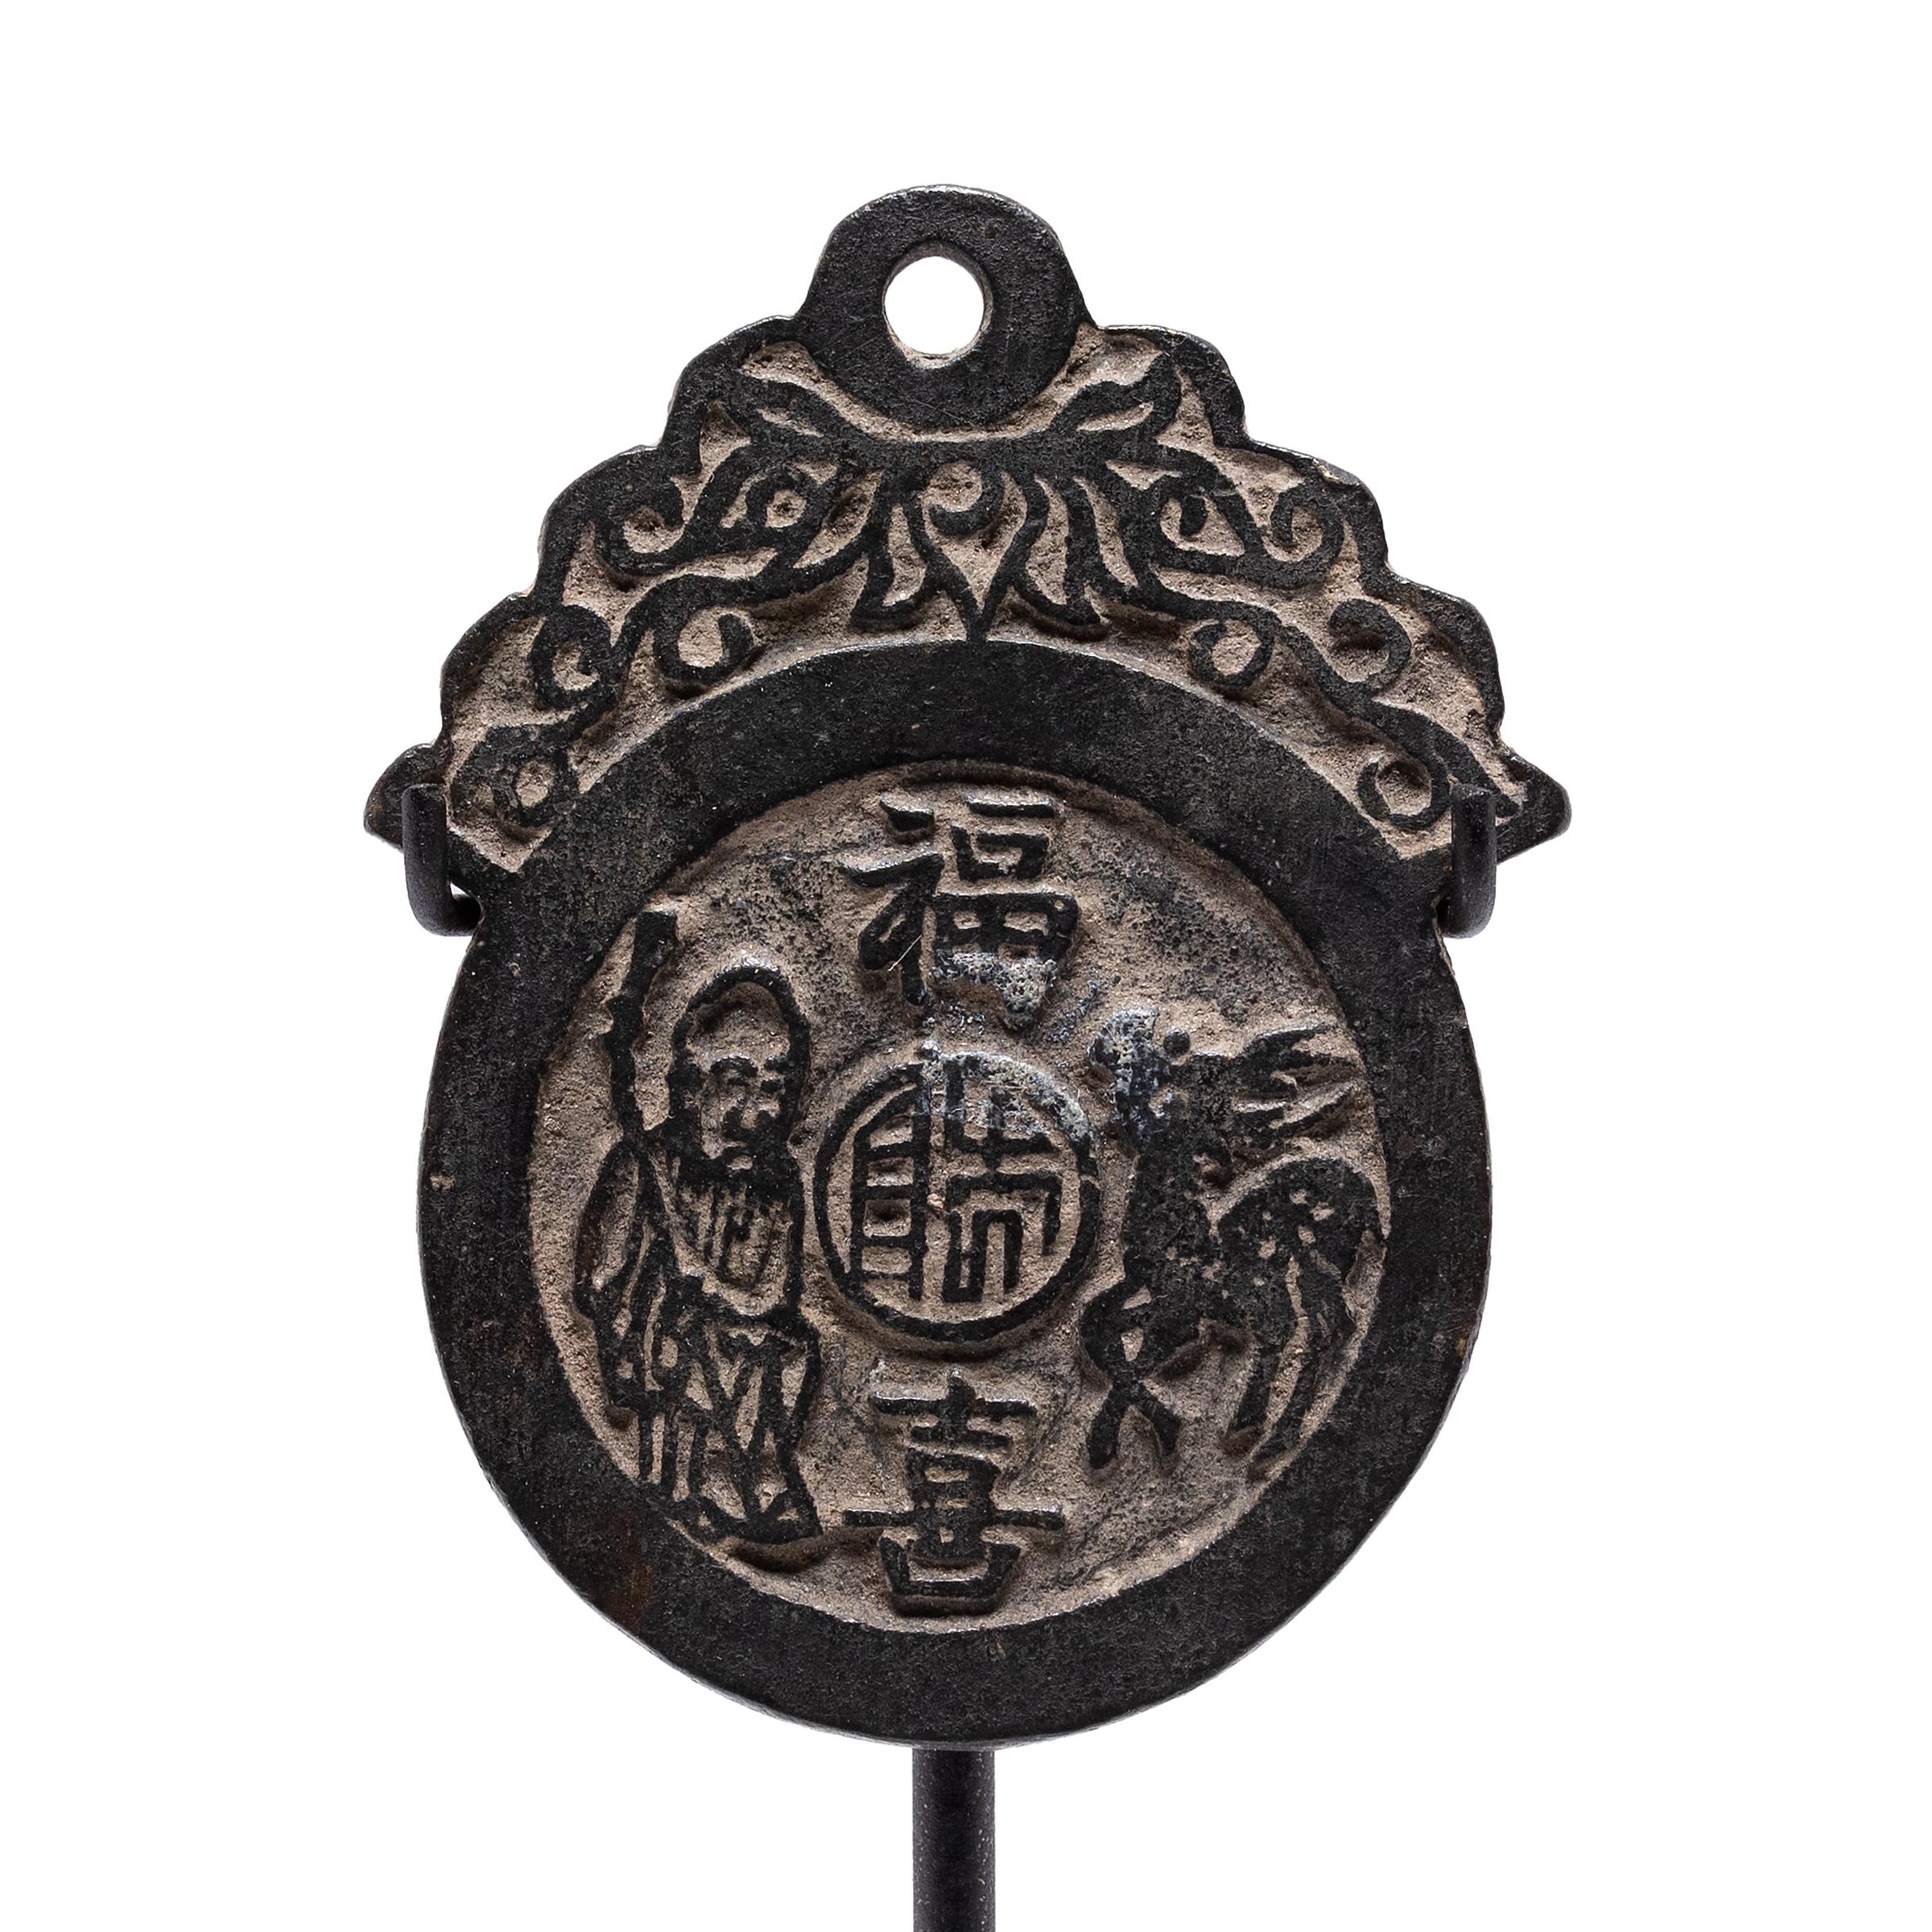 This antique metal amulet was once worn around the neck as a charm for lifelong happiness and professional success. The round amulet is cast of bronze in low relief and decorated with three central characters for happiness, longevity, and good